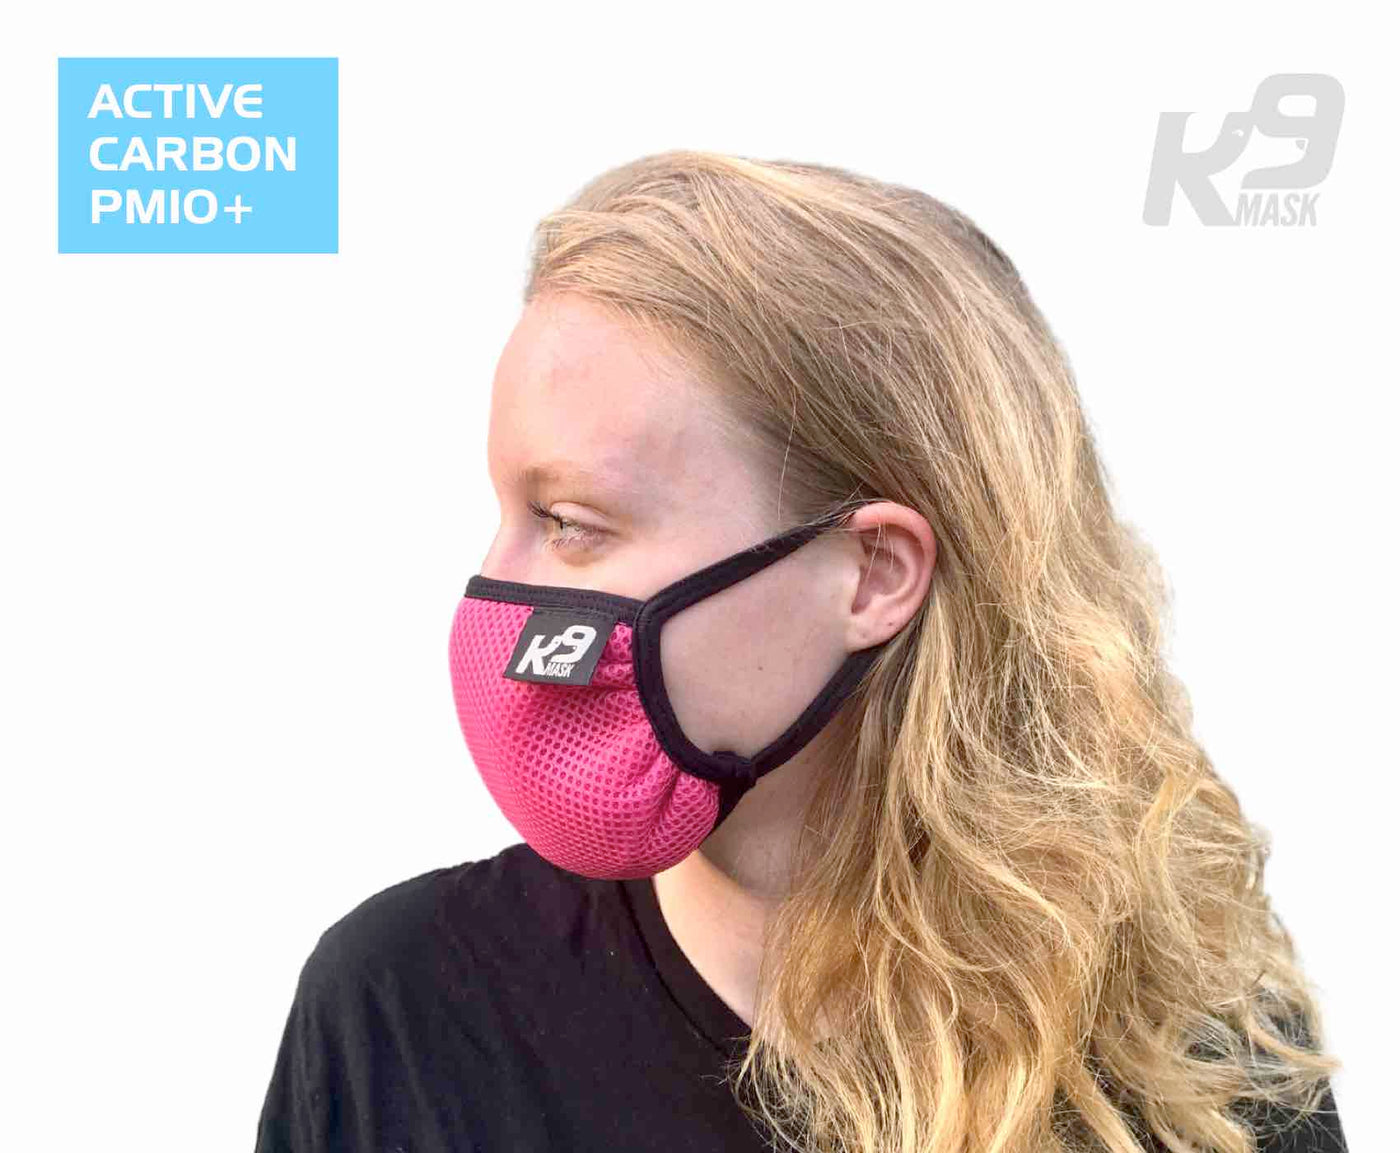 K9 Mask® for Humans woman clean breathe air filter